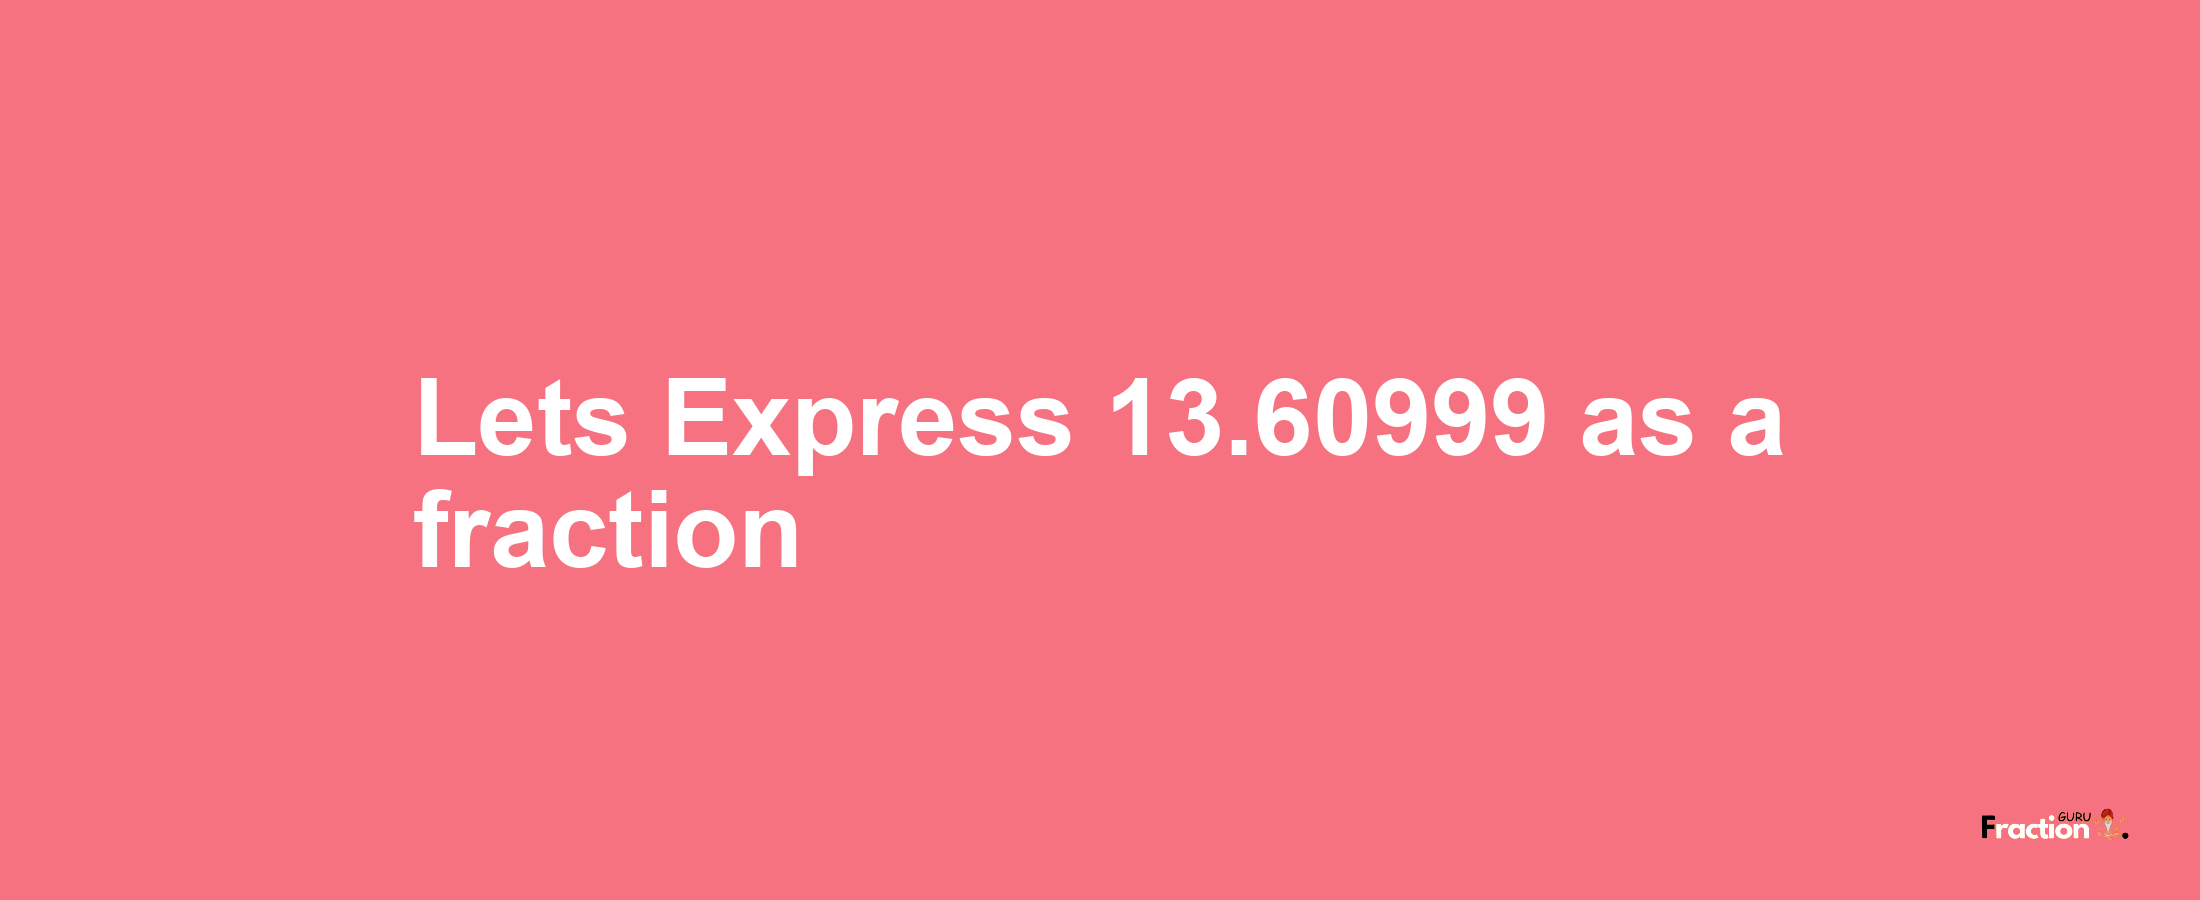 Lets Express 13.60999 as afraction